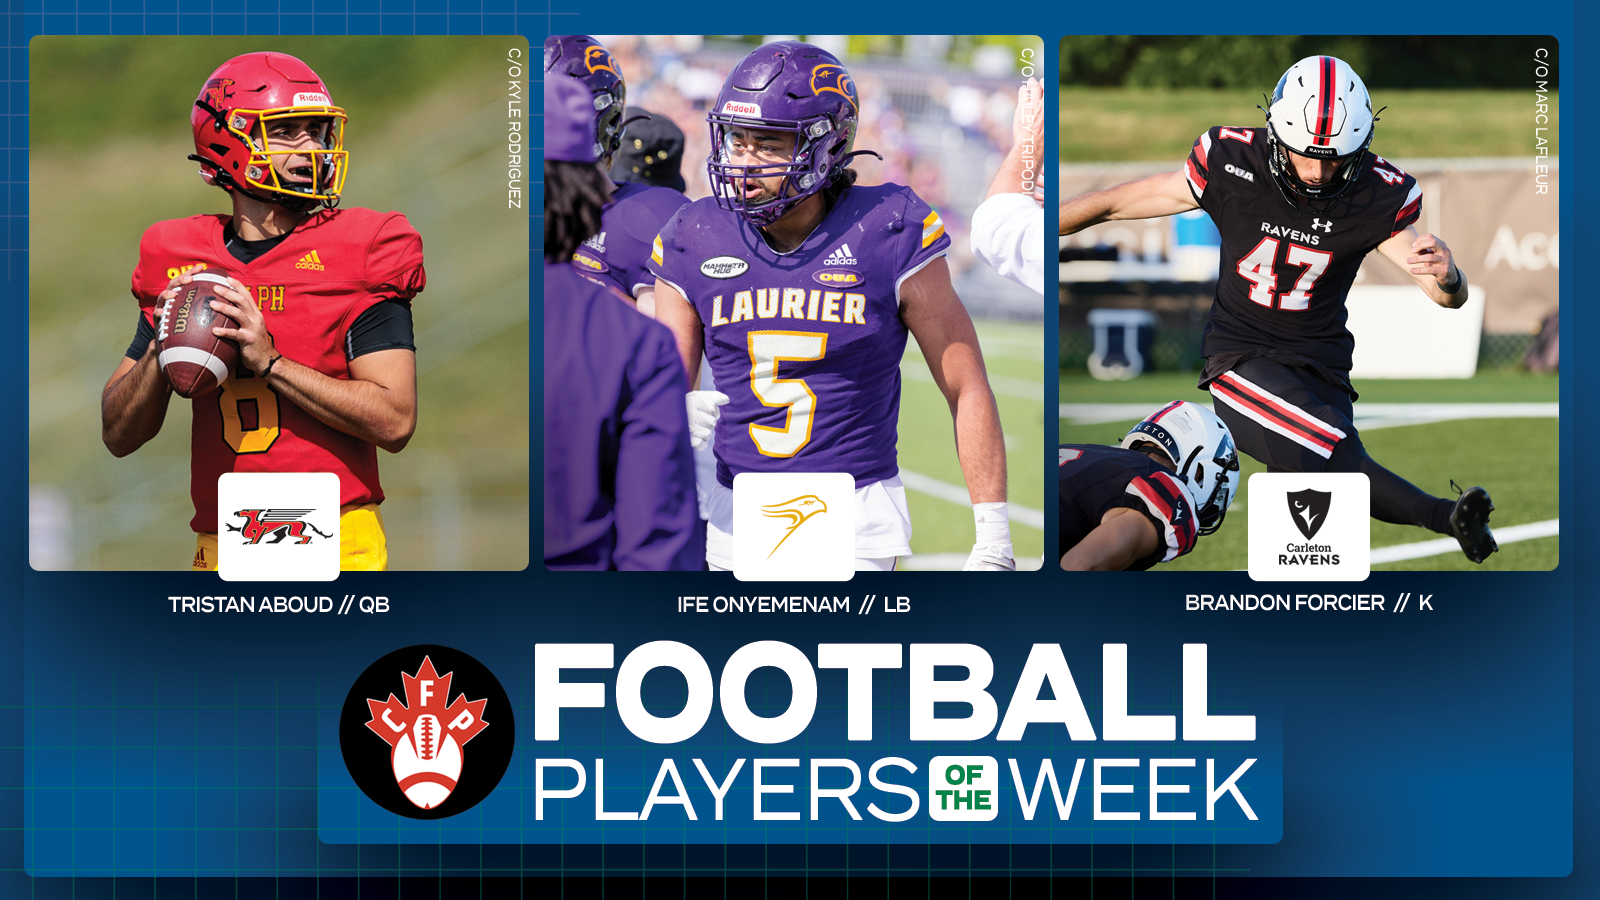 Graphic on predominantly blue background featuring action photos of Tristan Aboud, Ife Onyemenam, and Brandon Forcier, along with Canadian Football Perspective logo and white text that reads 'Football Players of the Week'